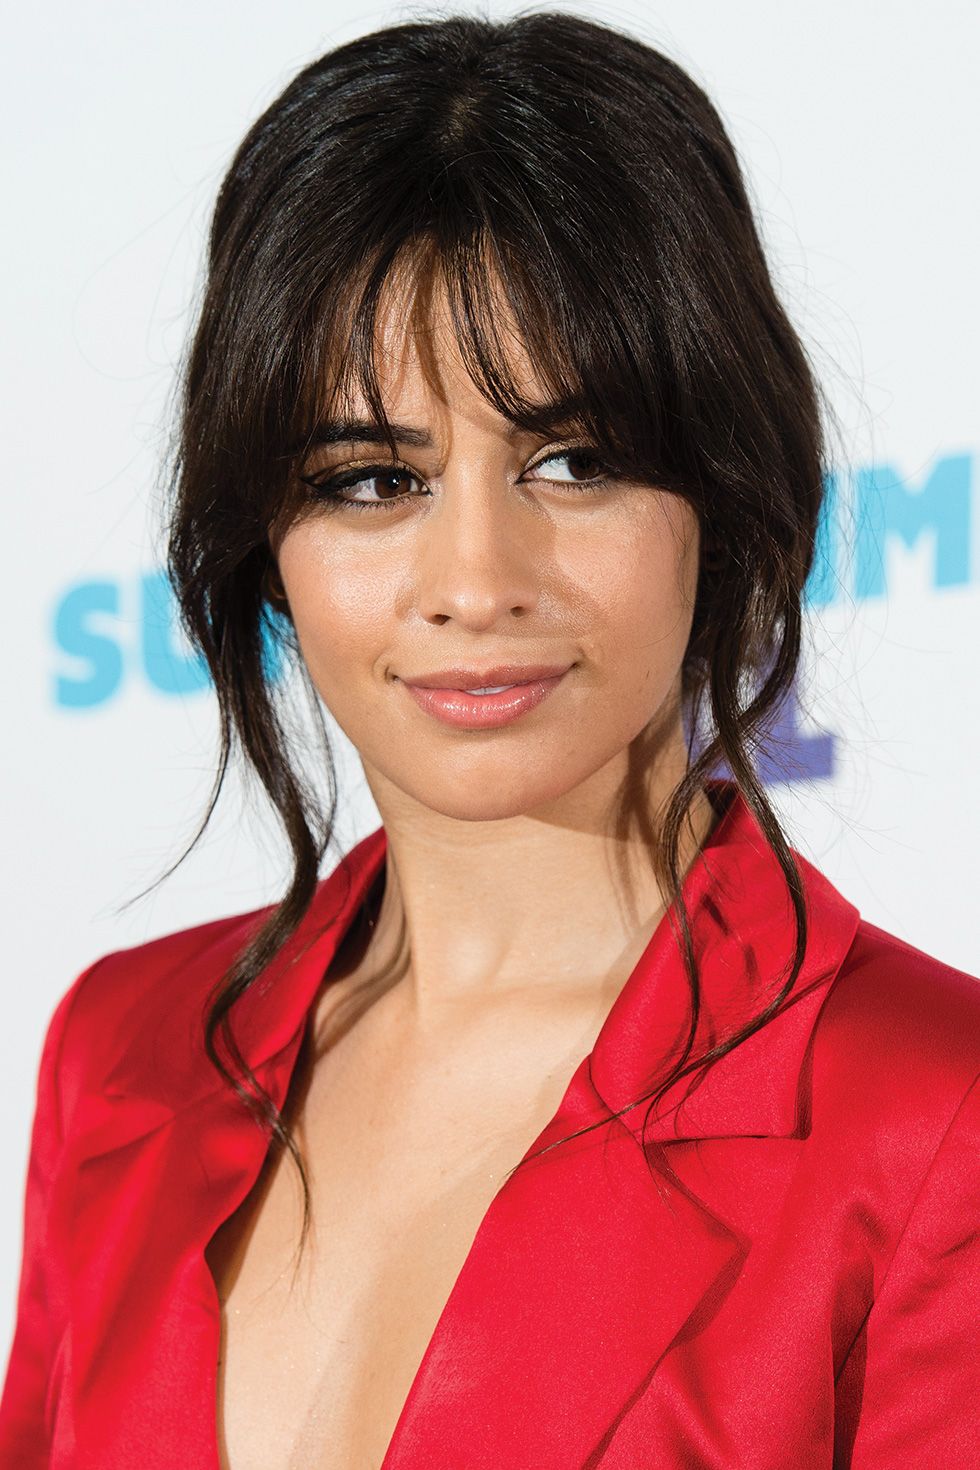 Camila Cabello's Mom Cut Her Bangs at Home | Pictures | POPSUGAR Beauty UK